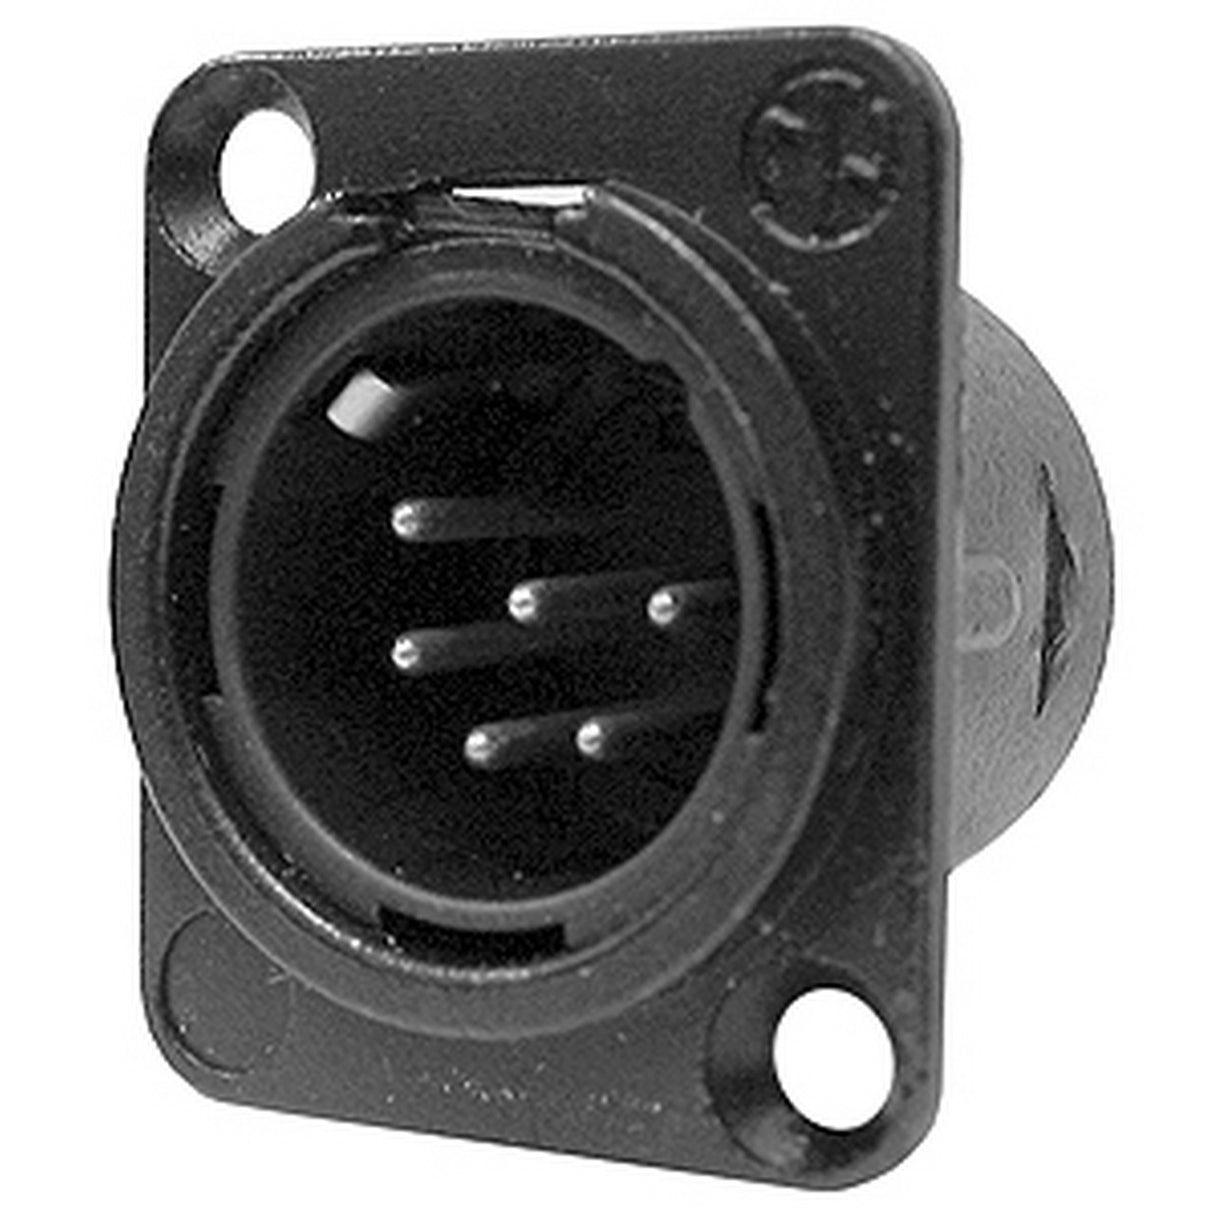 Ace Backstage Co. C-15121 Connectrix D-Series 6-Pin Male Connector